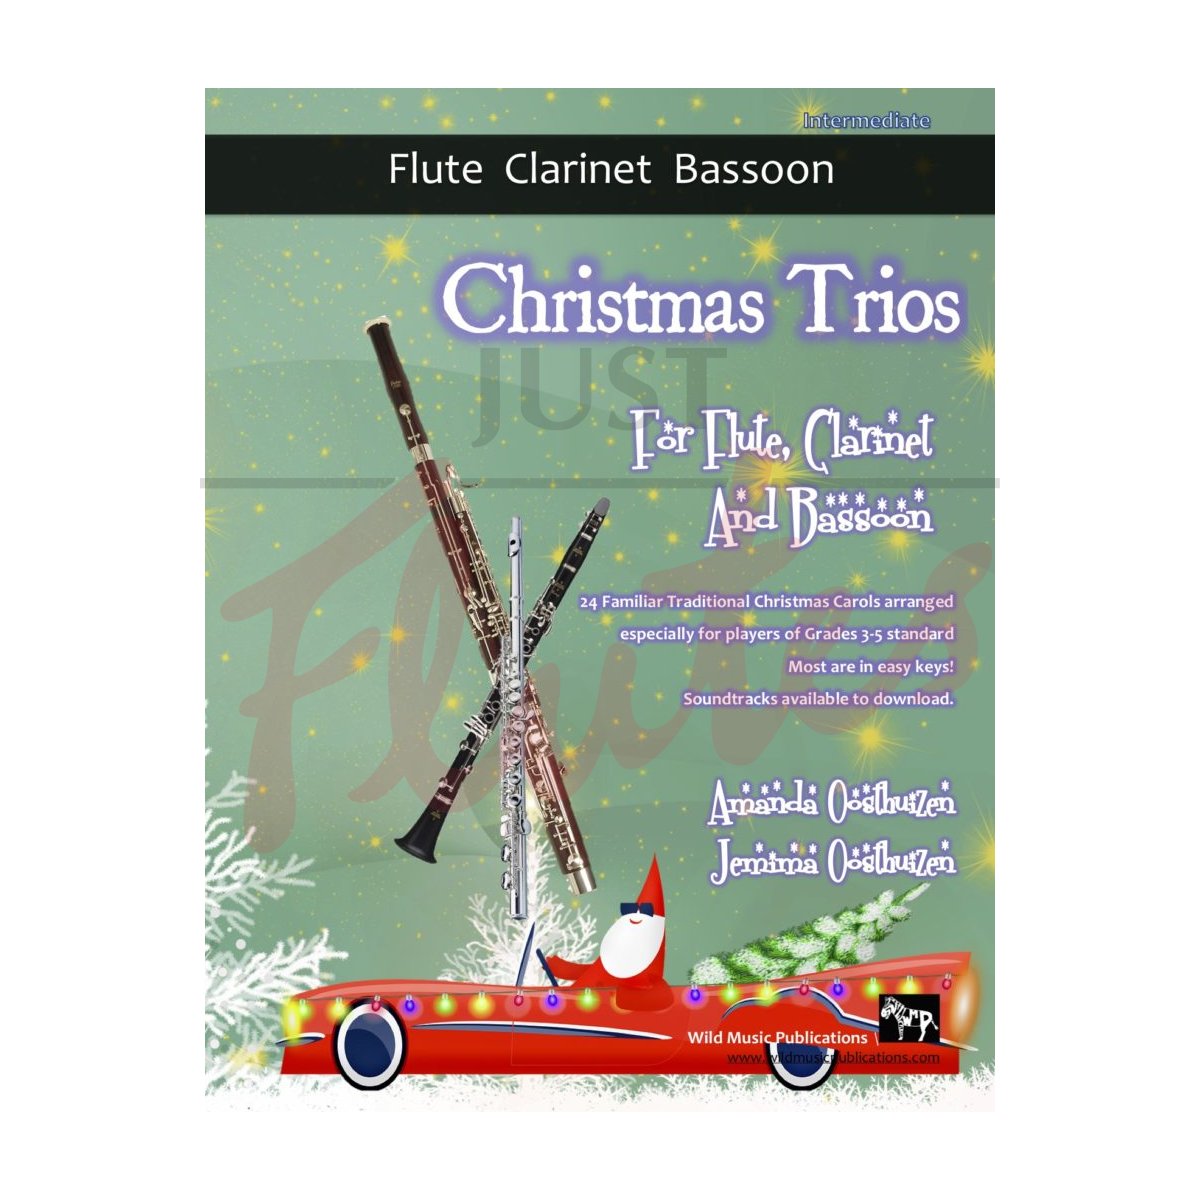 Christmas Trios for Flute, Clarinet and Bassoon